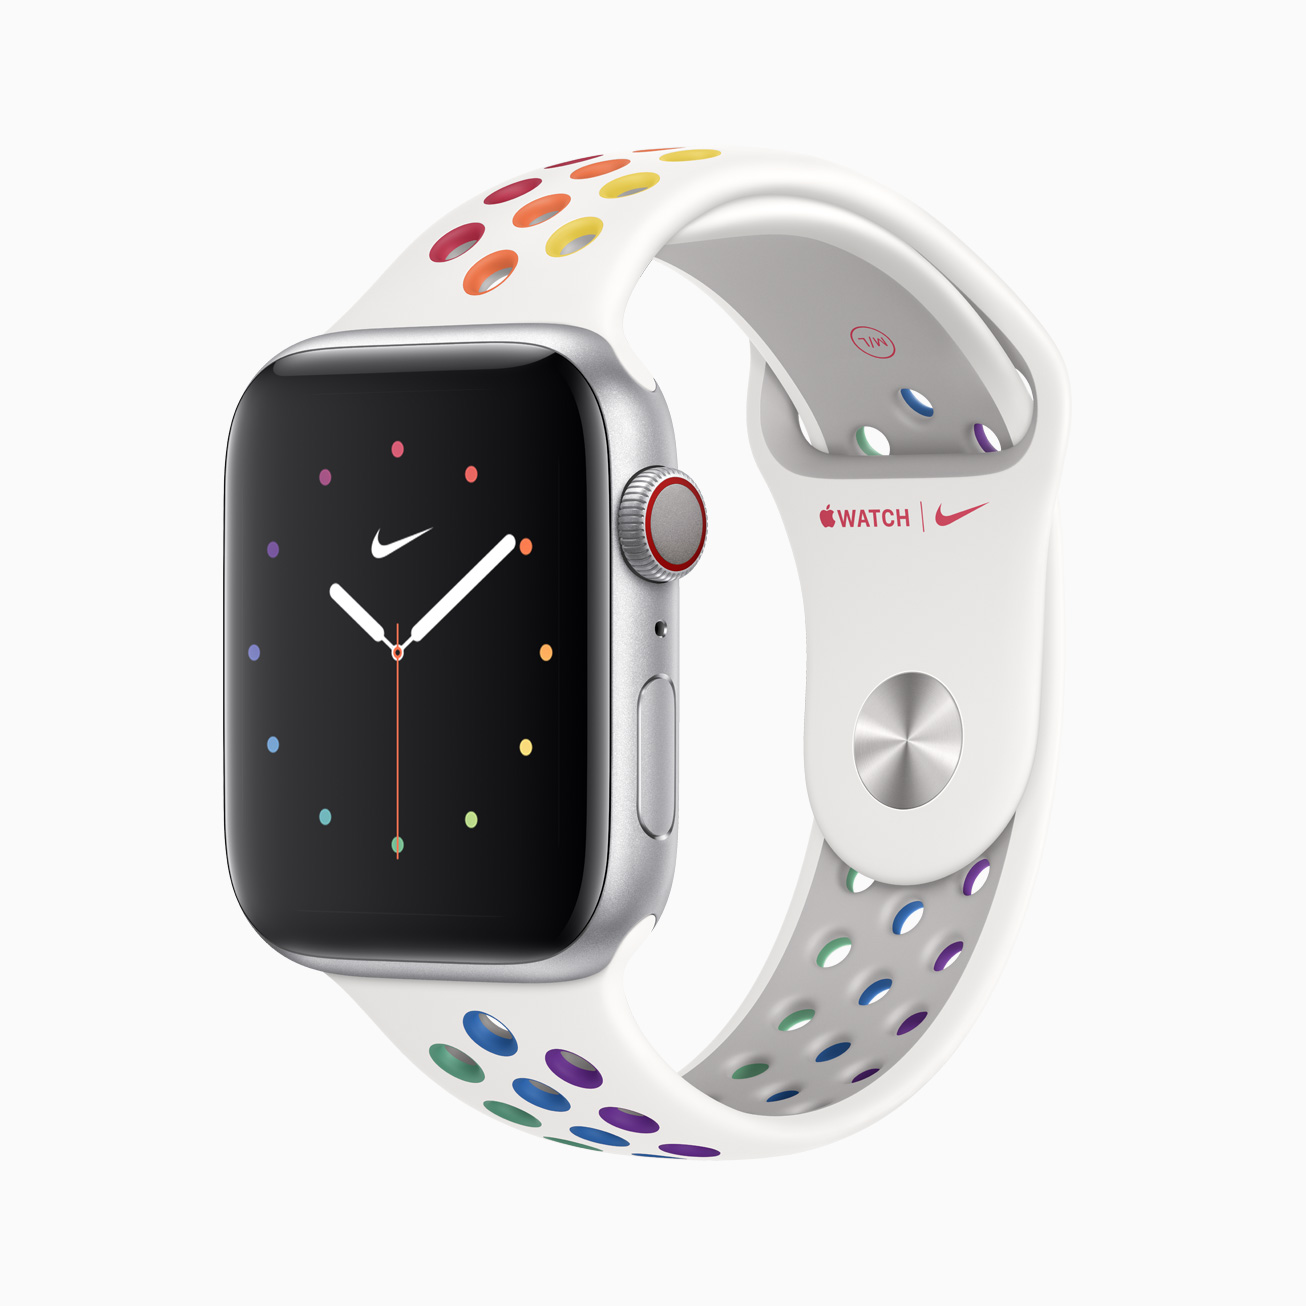 Apple Watch Pride Edition Band Gets A Nike Version For The First